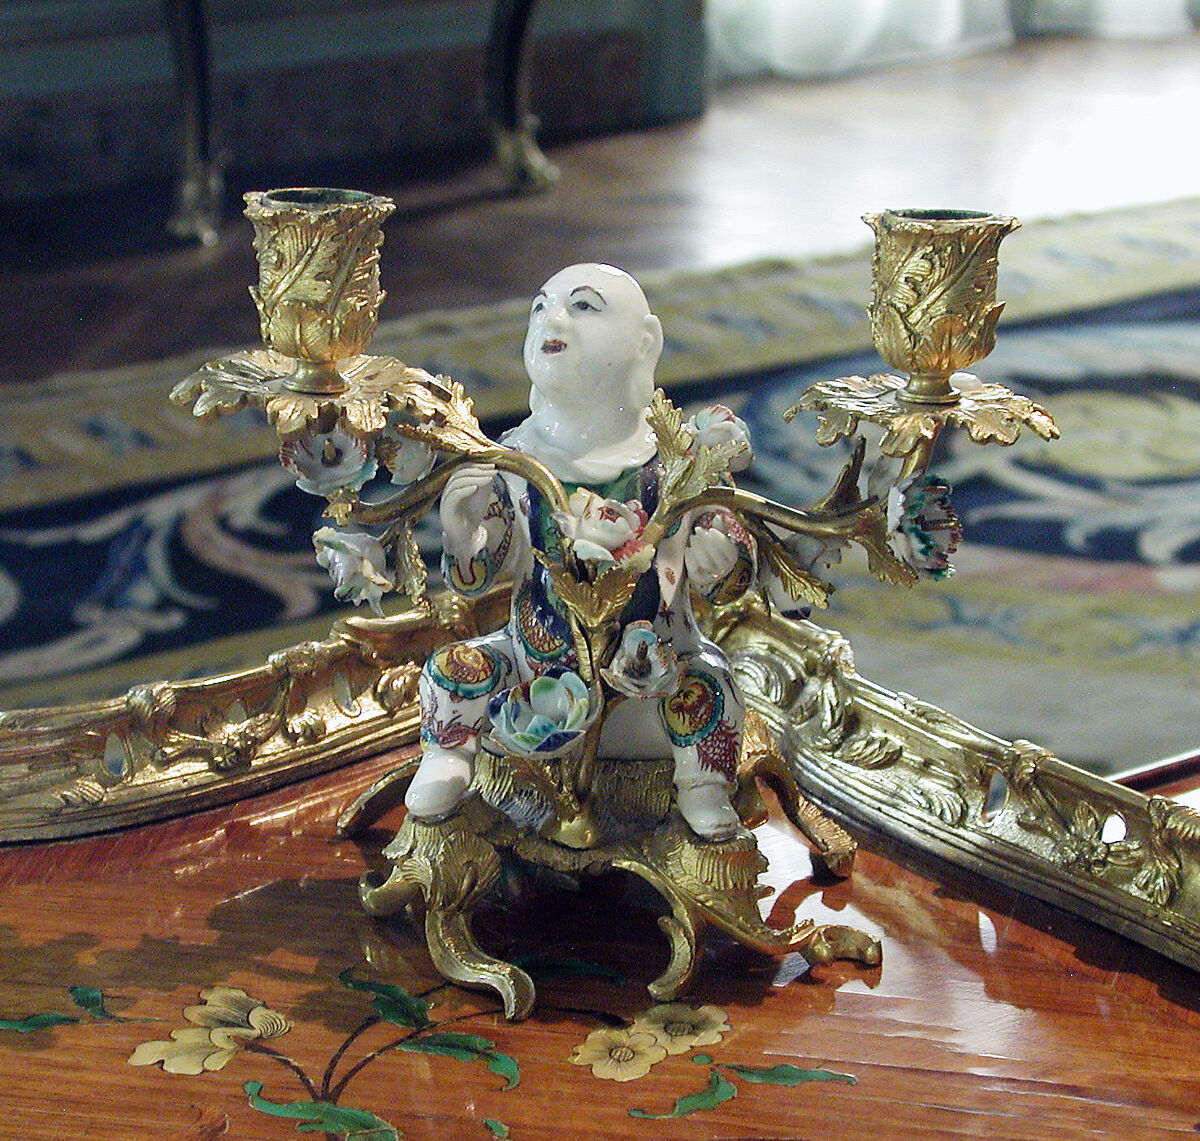 Candelabrum (one of a pair), Villeroy (French, 1734/37–1748), Soft-paste porcelain, gilt-bronze mounts, French, Villeroy 